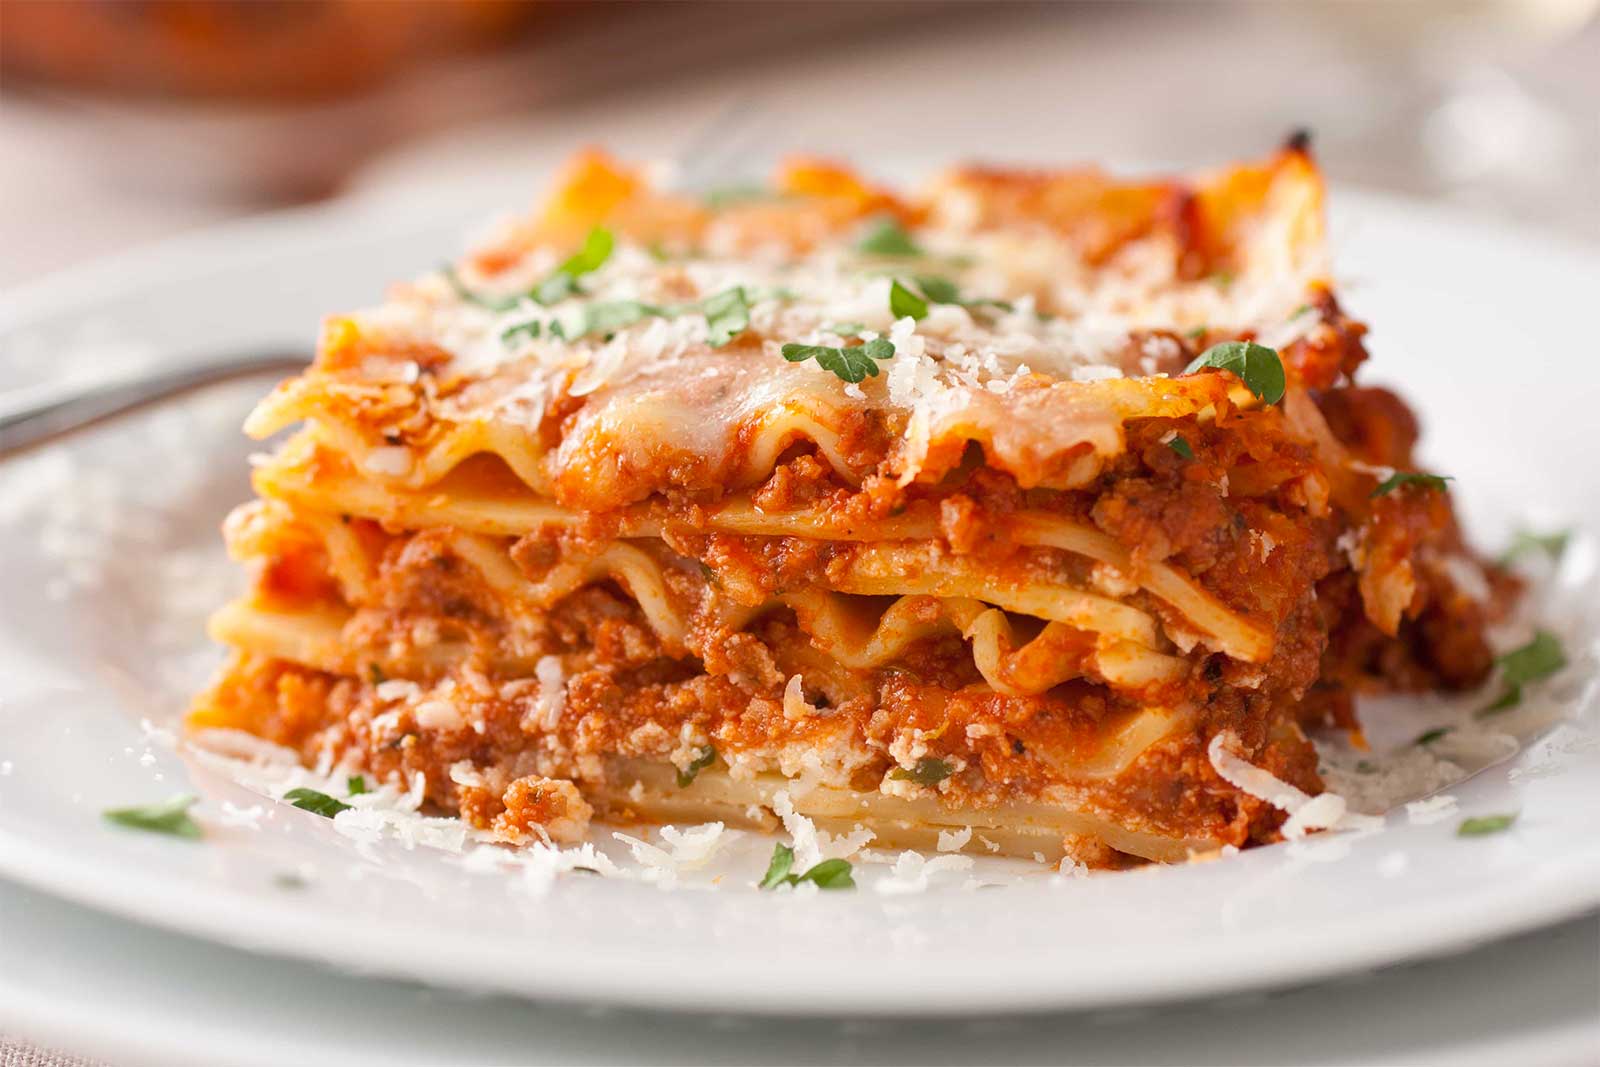 Share Some Dishes With These Celebs and We’ll Reveal Your Celeb Doppelgänger Lasagna